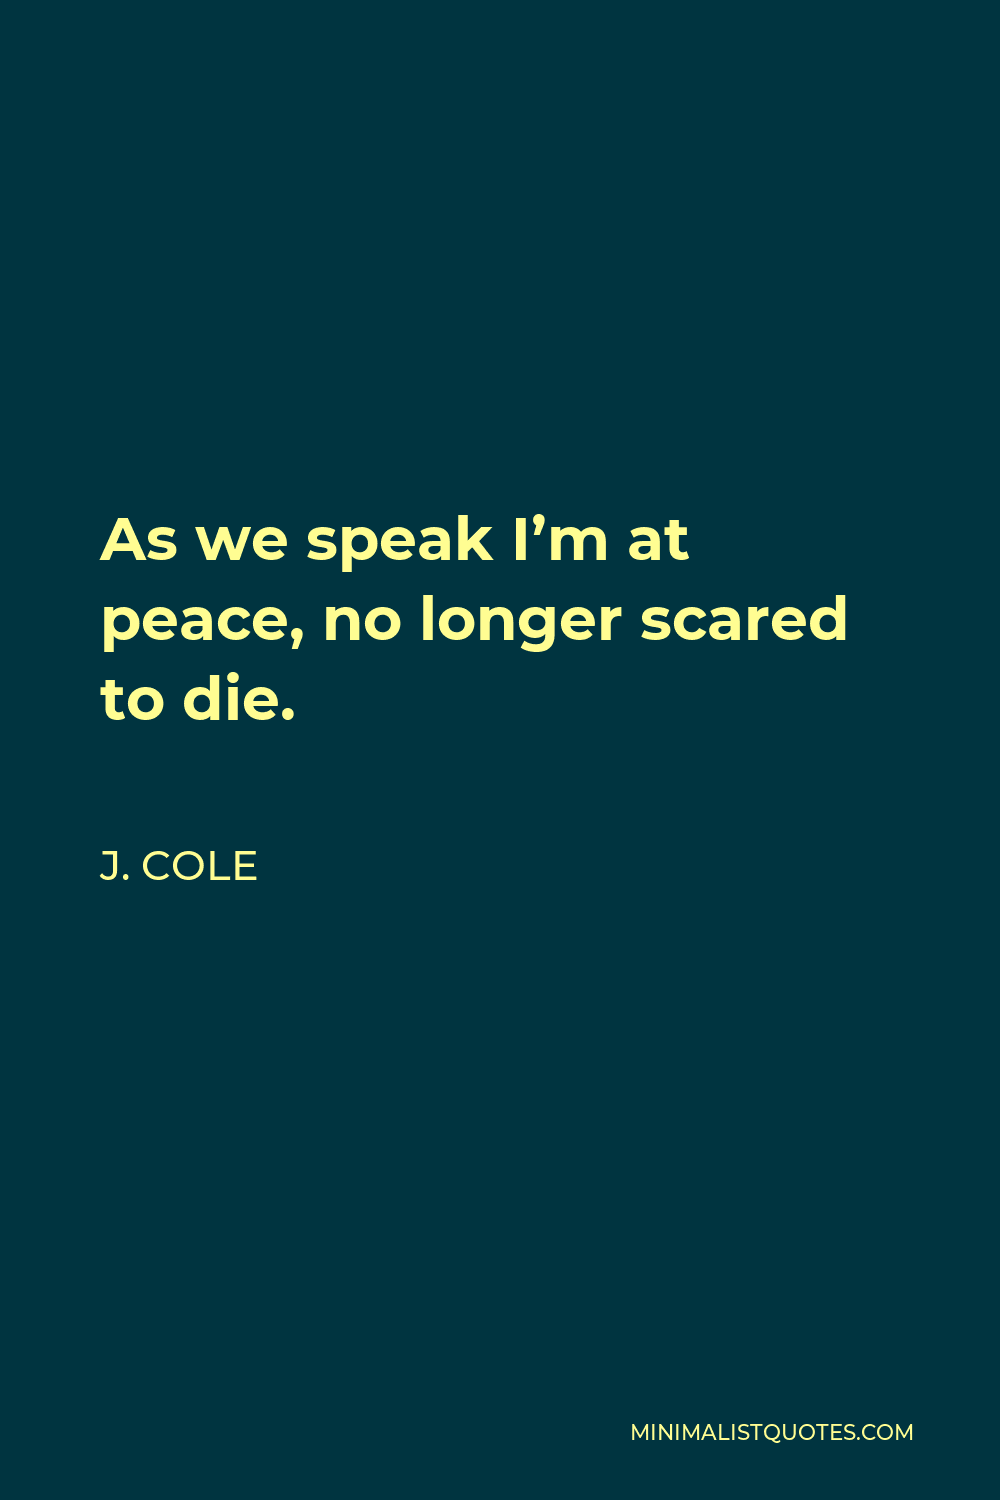 J. Cole Quote - As we speak I’m at peace, no longer scared to die.